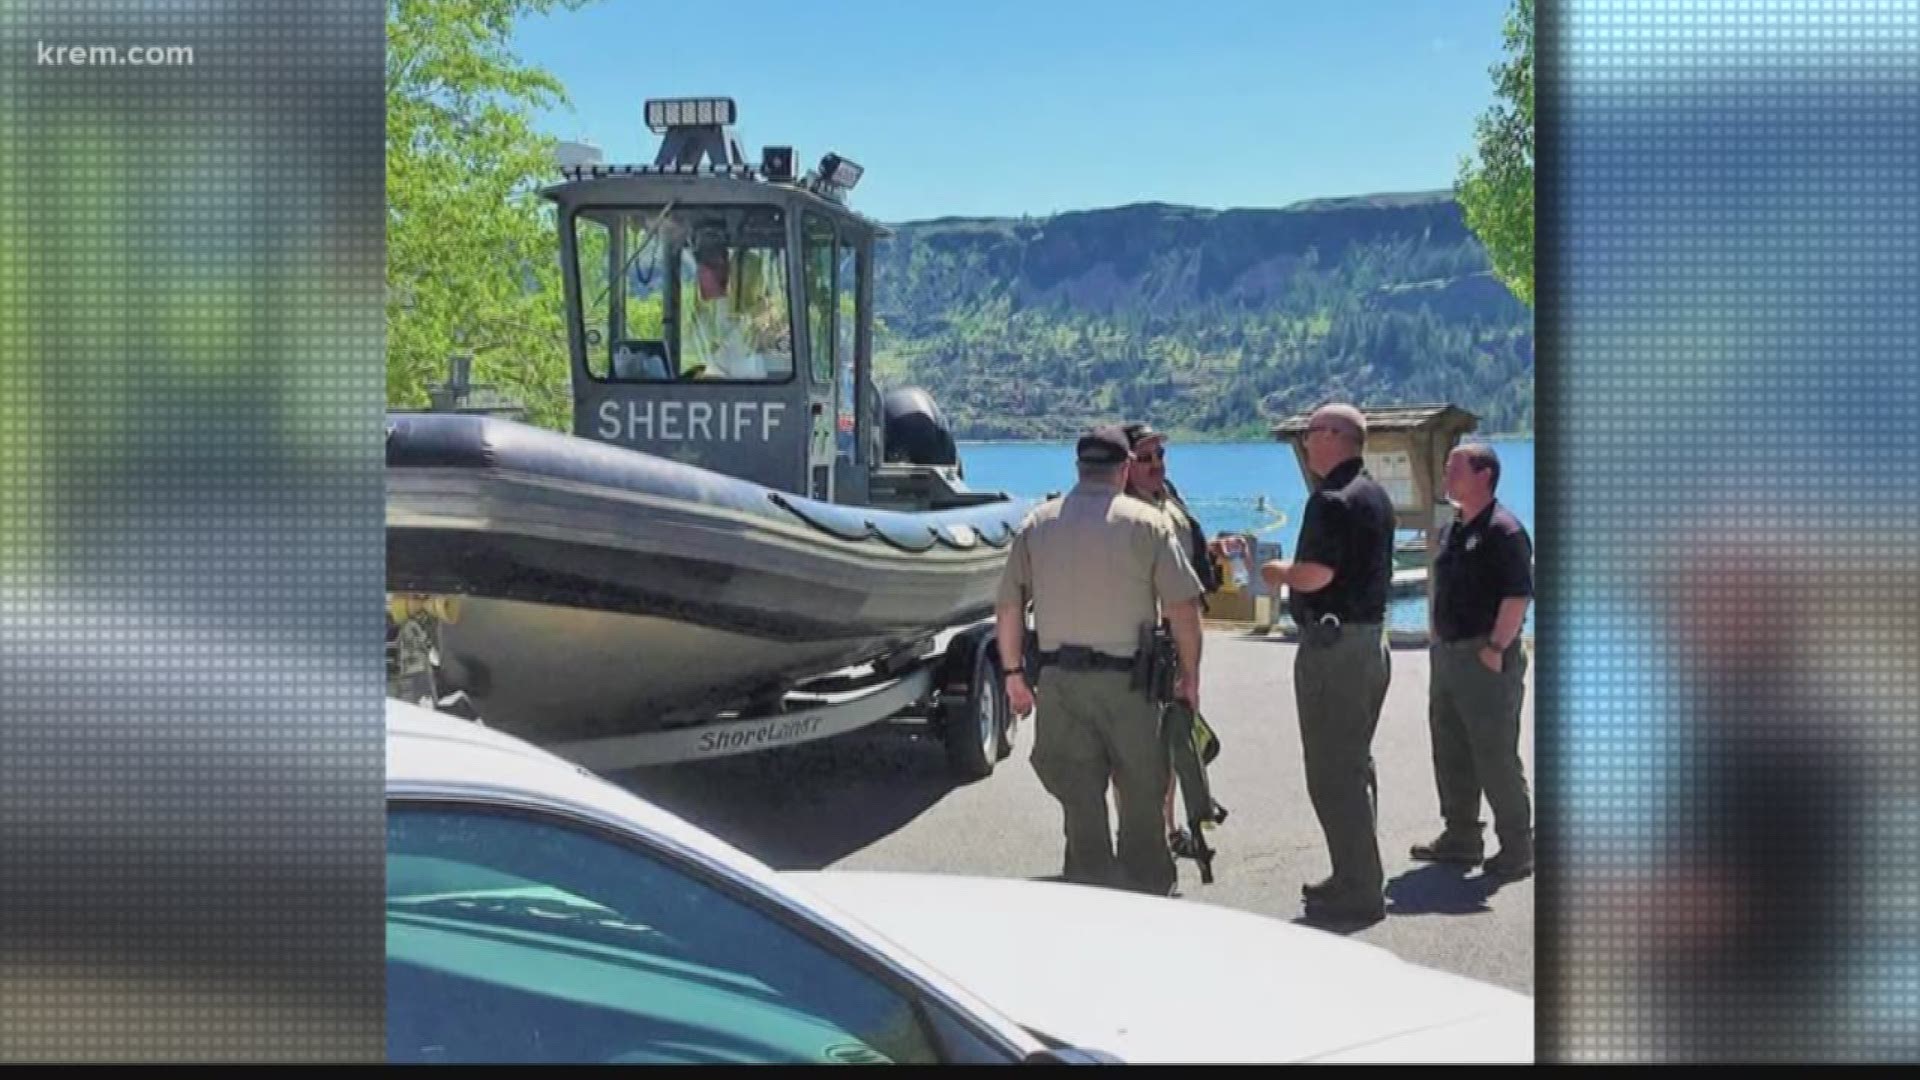 Friends reported David V. Fesko, 17, missing around 8:30 p.m. on Friday after watching him try swimming to shore after falling off a personal flotation device at Steamboat Rock State Park.